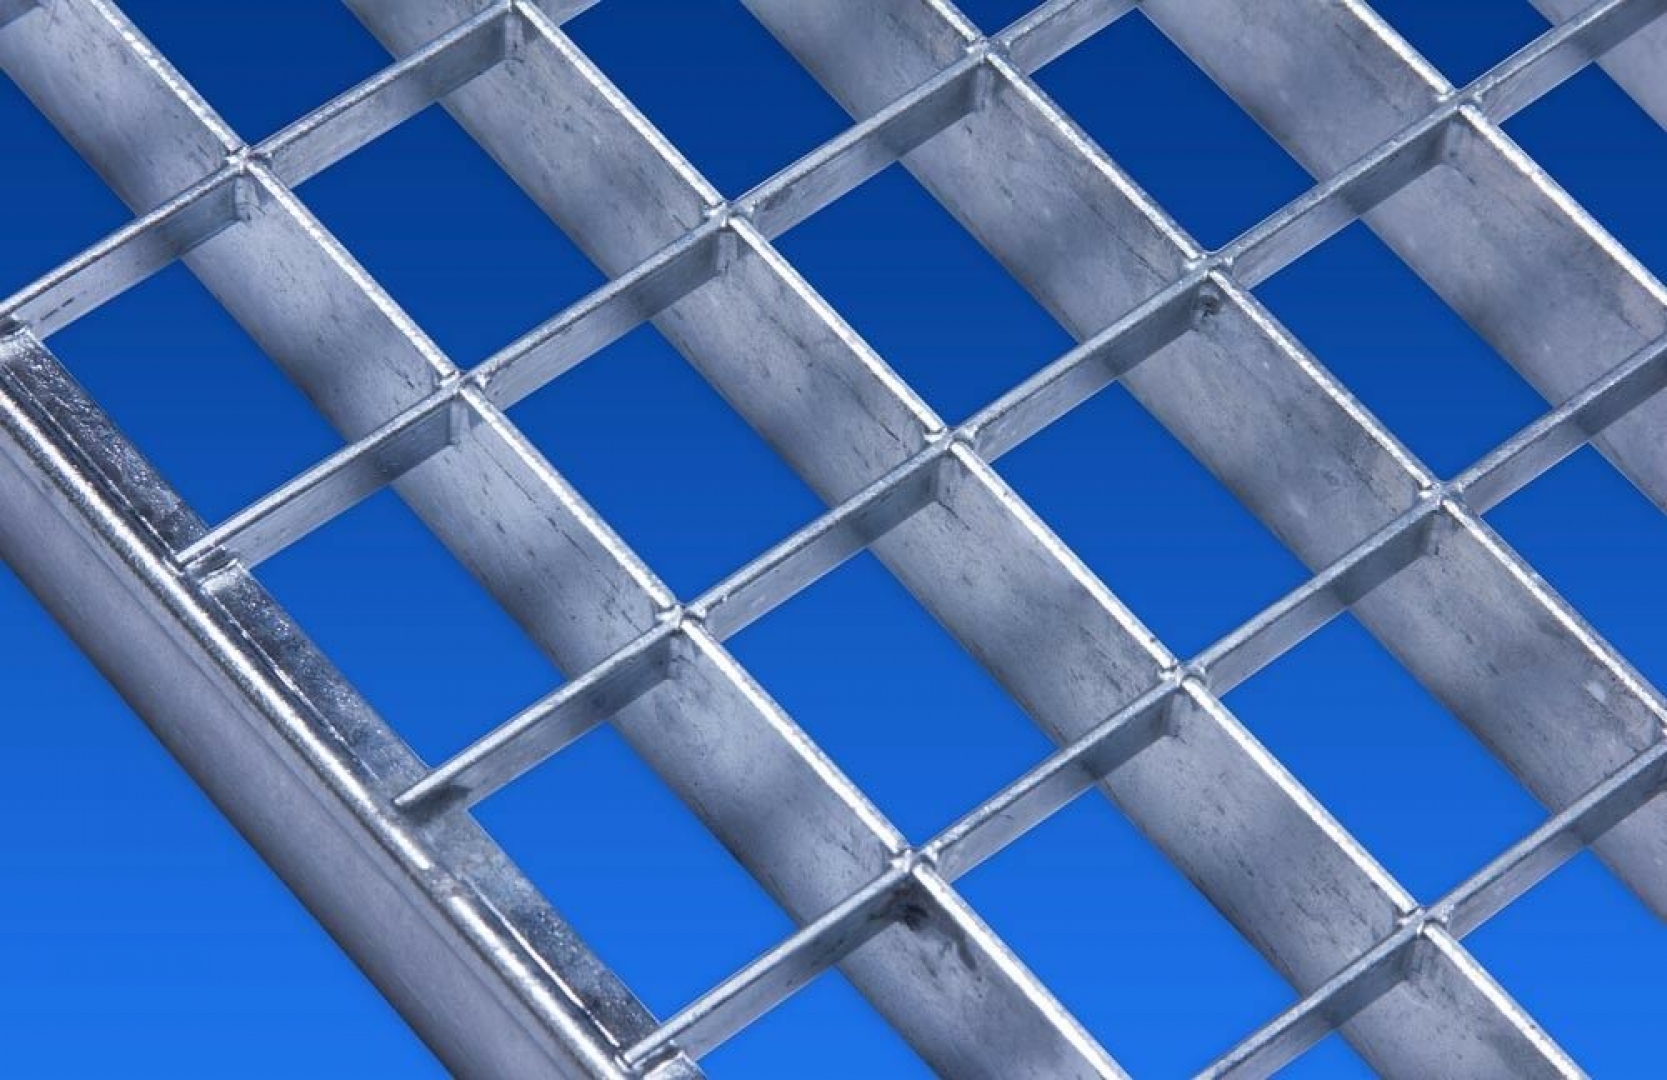 Baunorm Grating 490x740mm galvanized mesh size 30x30mm height 20mm without frame